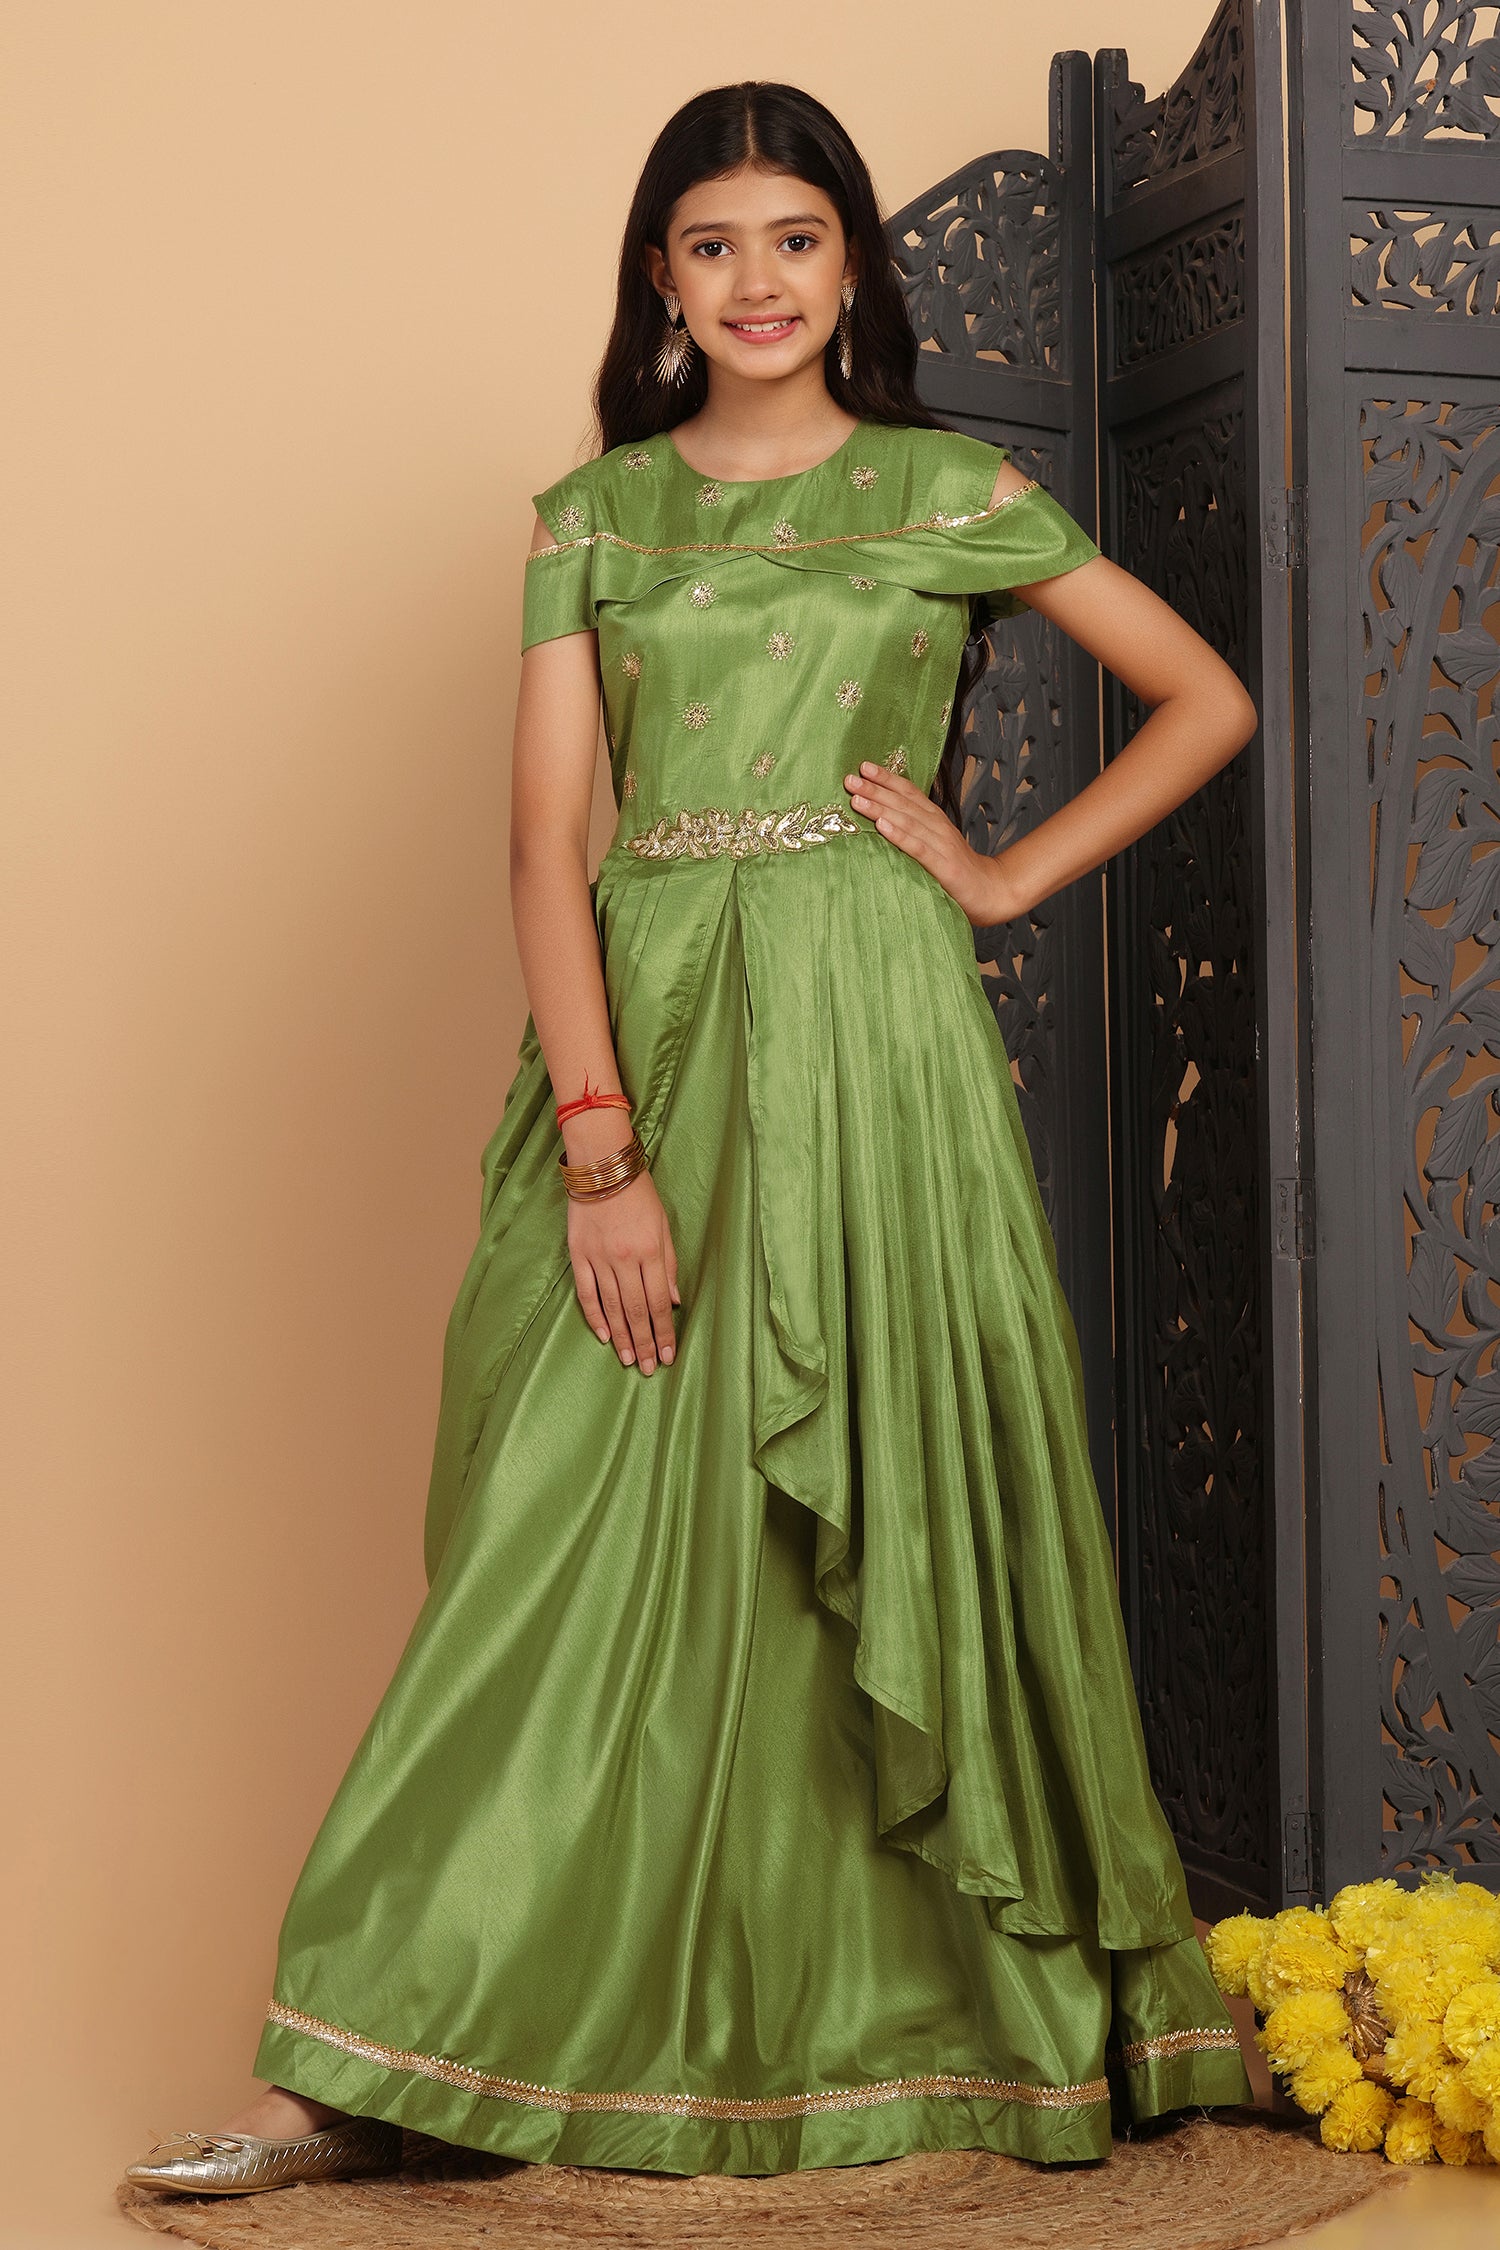 Traditional Function Wear Gown With Dupatta Collection Pista Green Heavy  Butterfly Net Gown | Gown with dupatta, Net gowns, Net dupatta designs